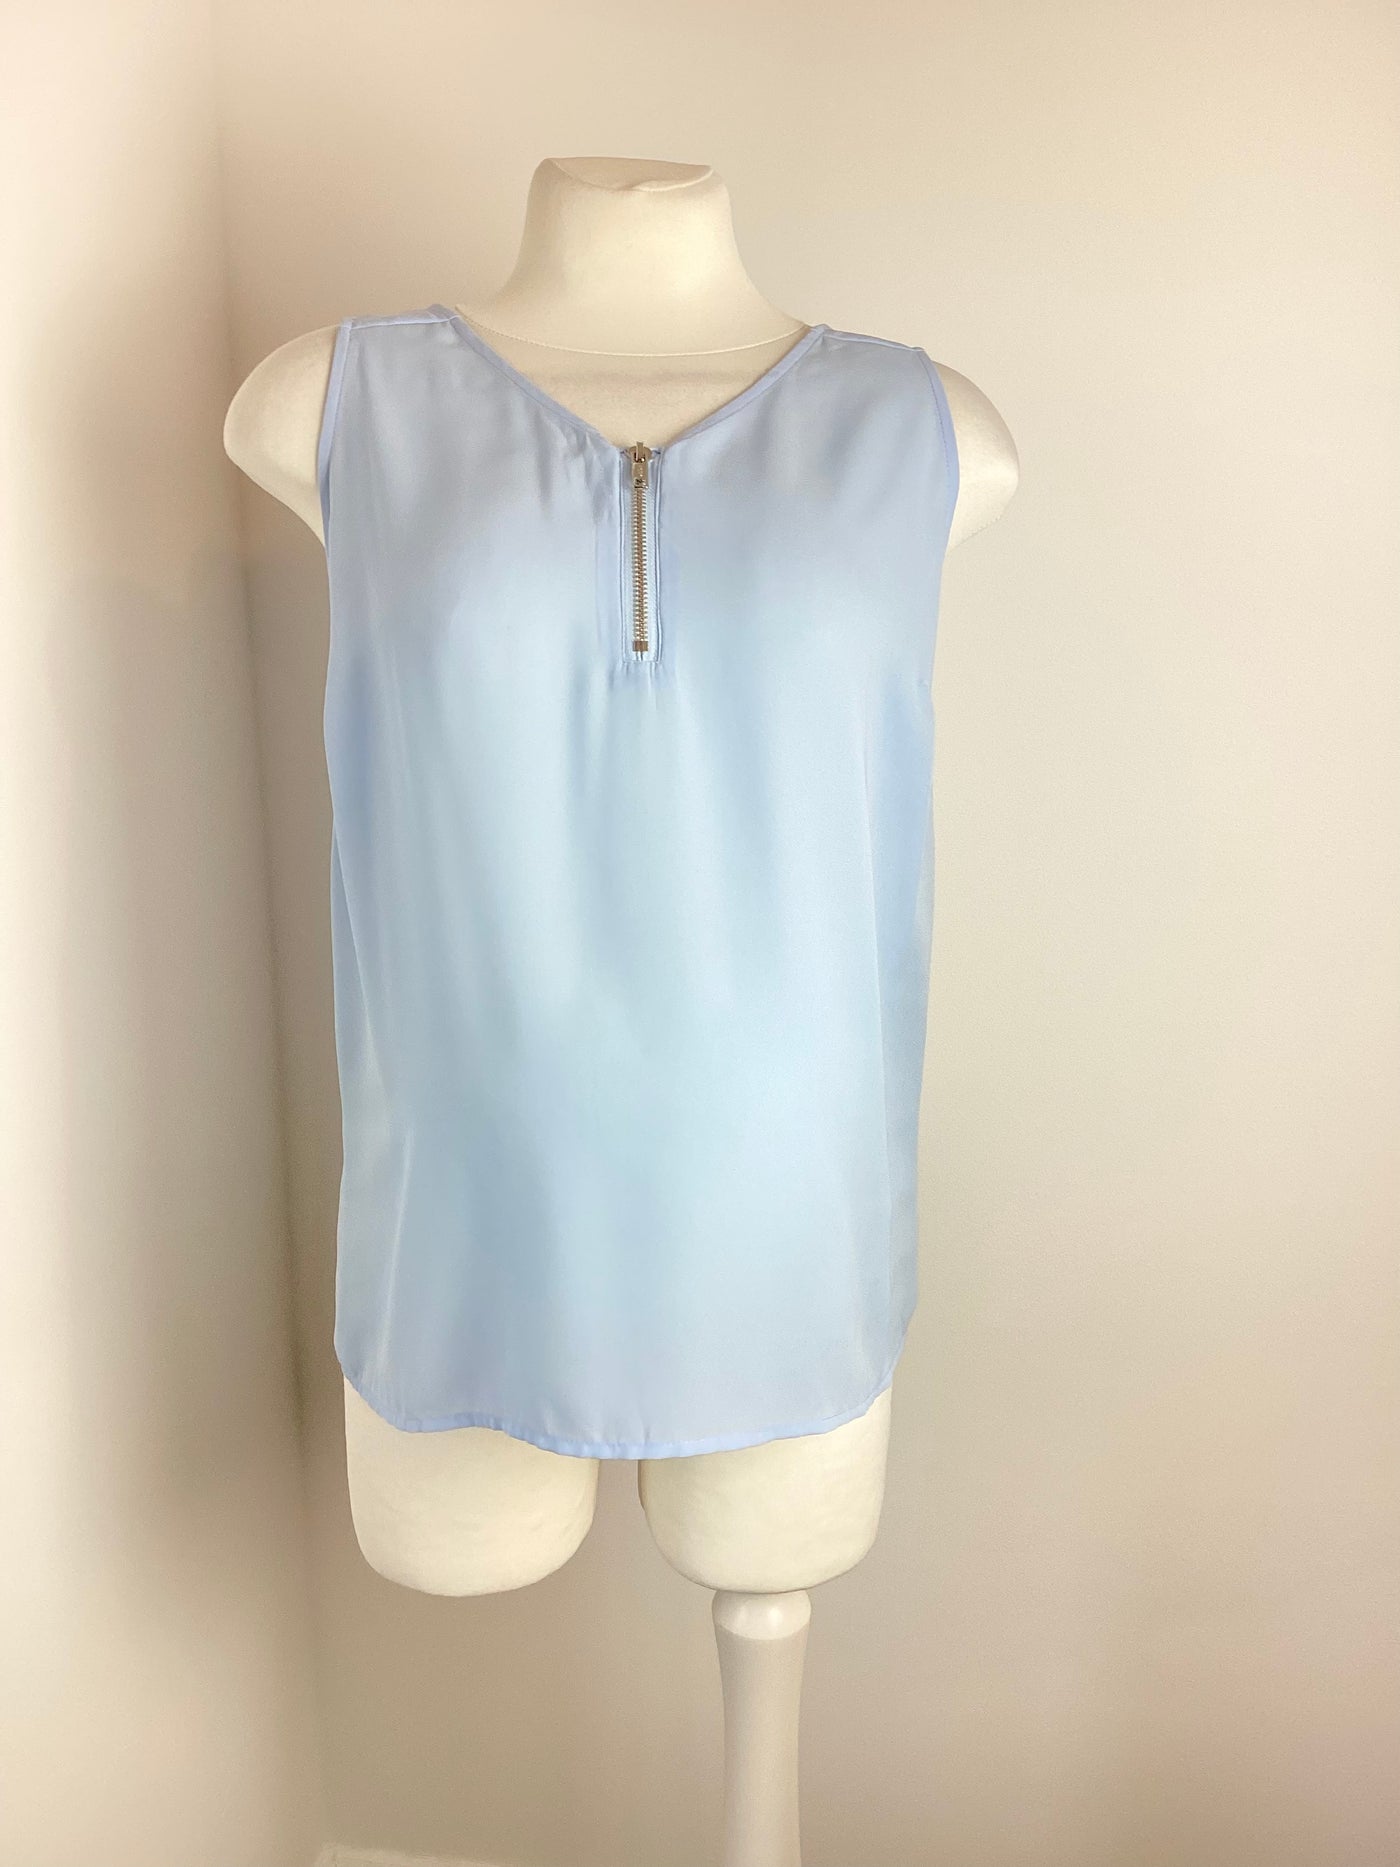 New Look Maternity Light blue sleeveless top with zip front - Size 8